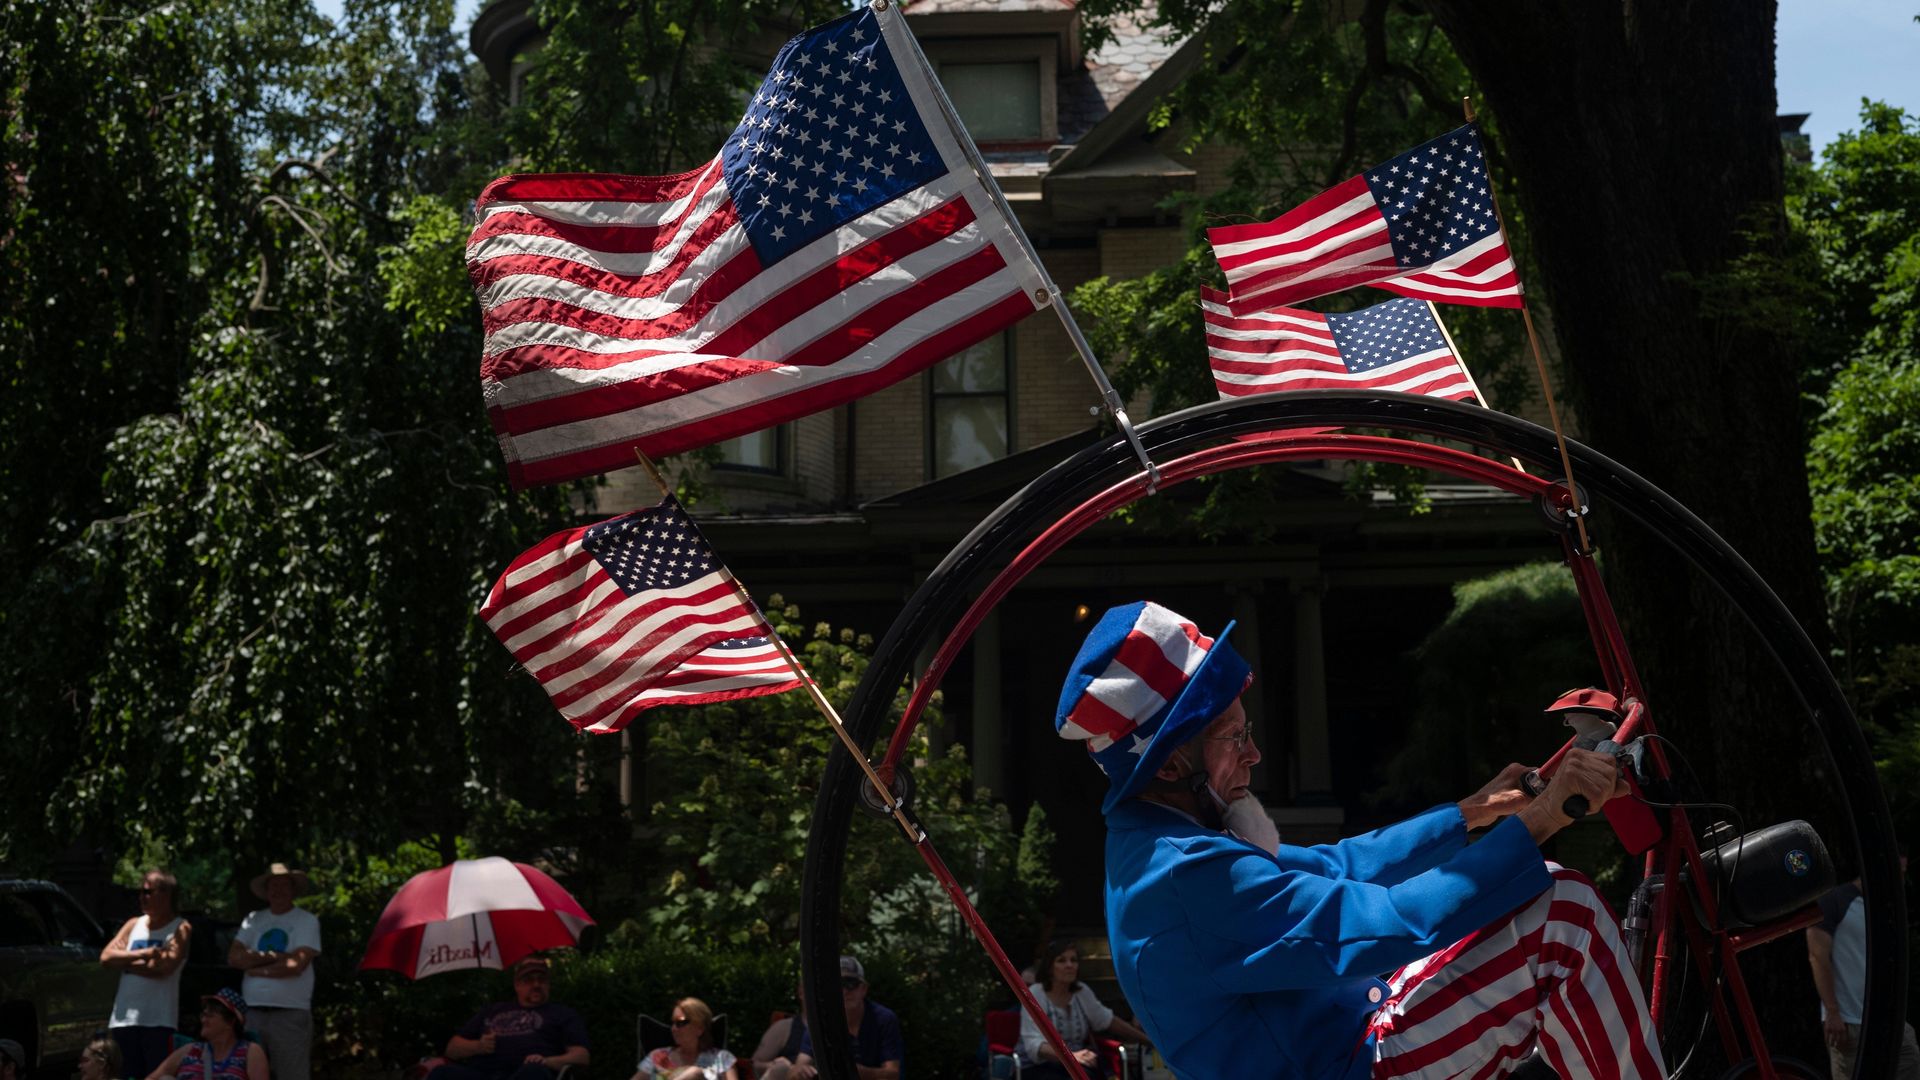 A man dressed as Uncle Sam rides a flag-adorned bicycle in a parade. 